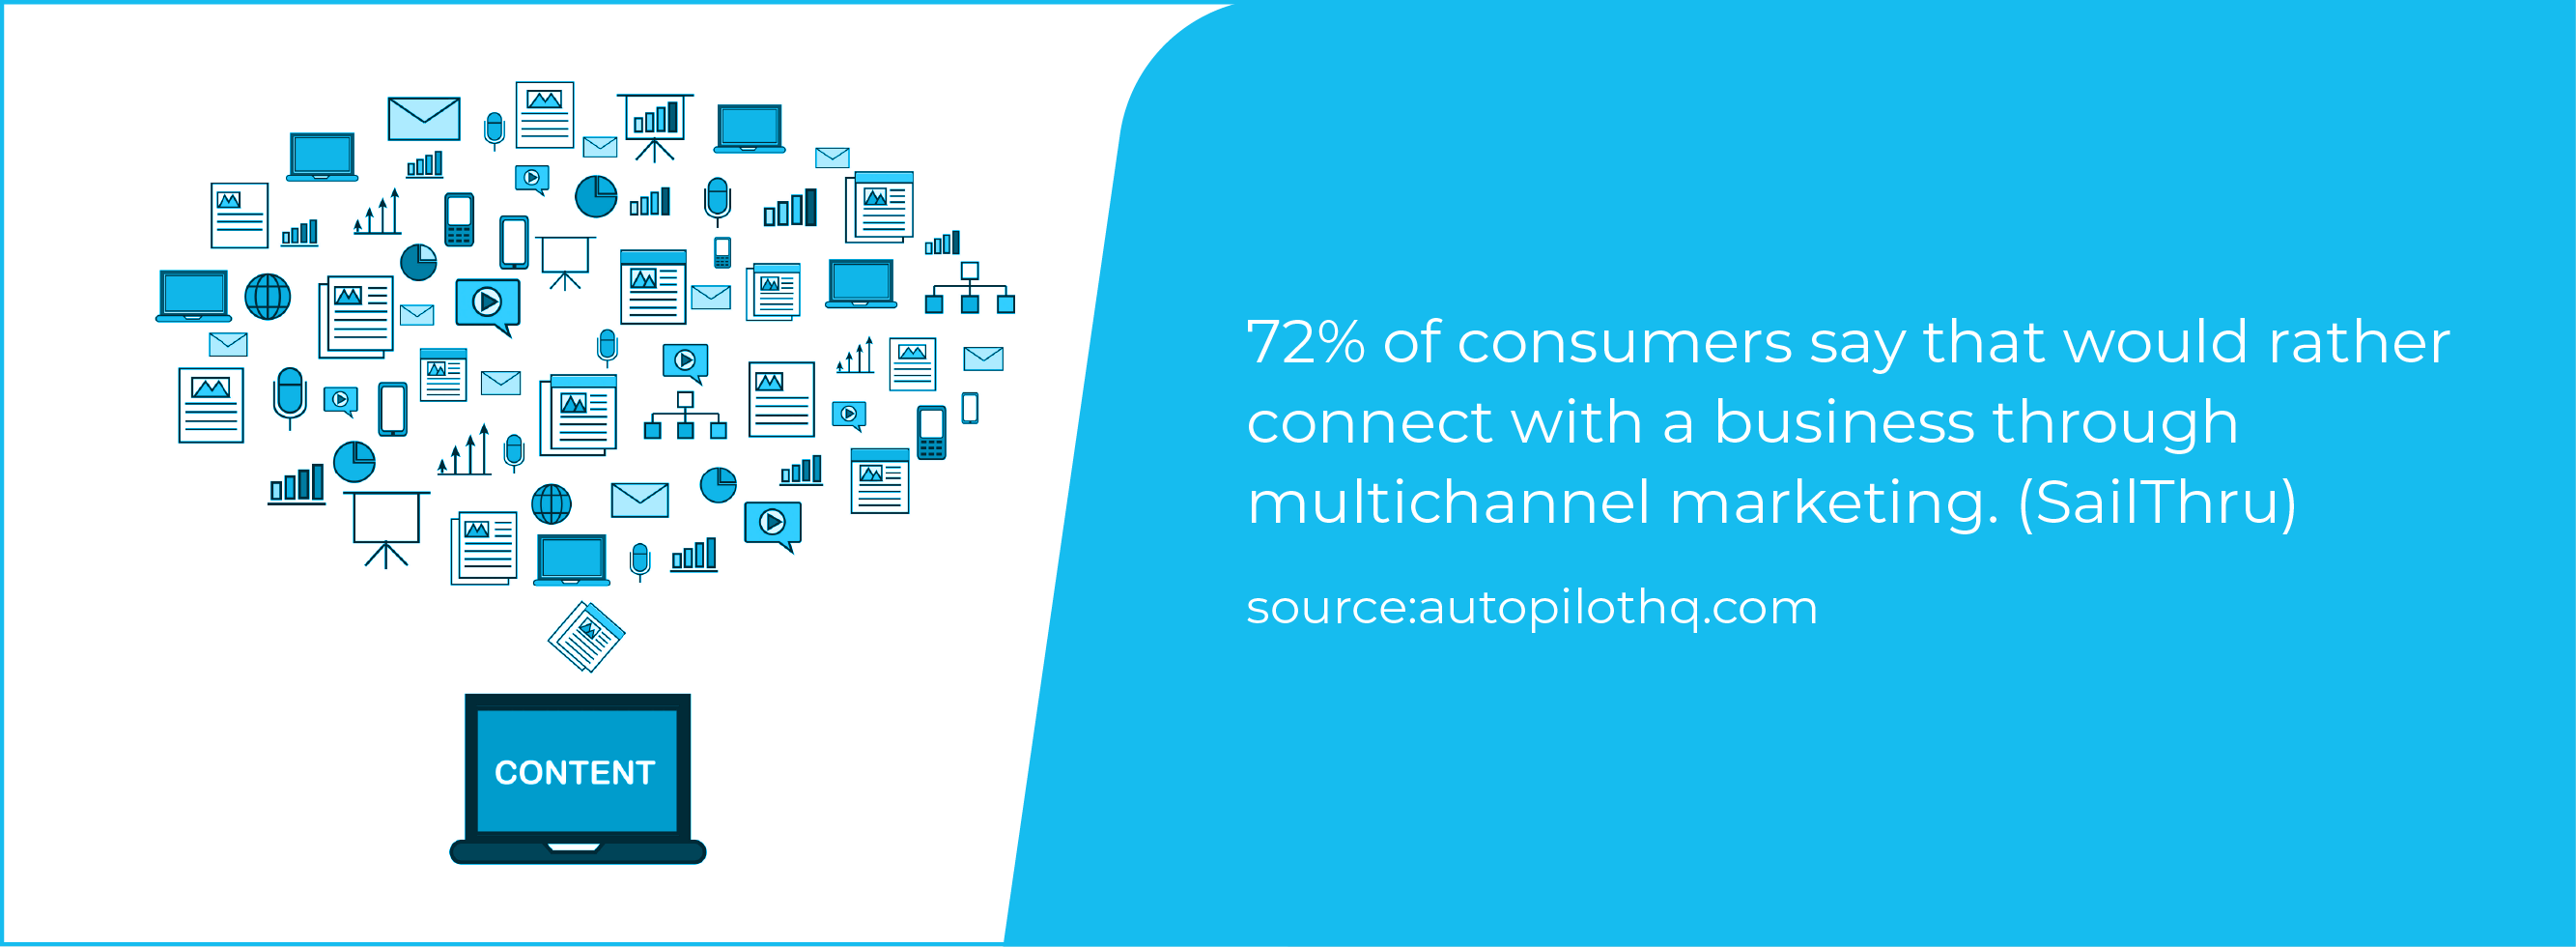 Text- 72% of consumers say they would rather connect with a business through multichannel marketing.